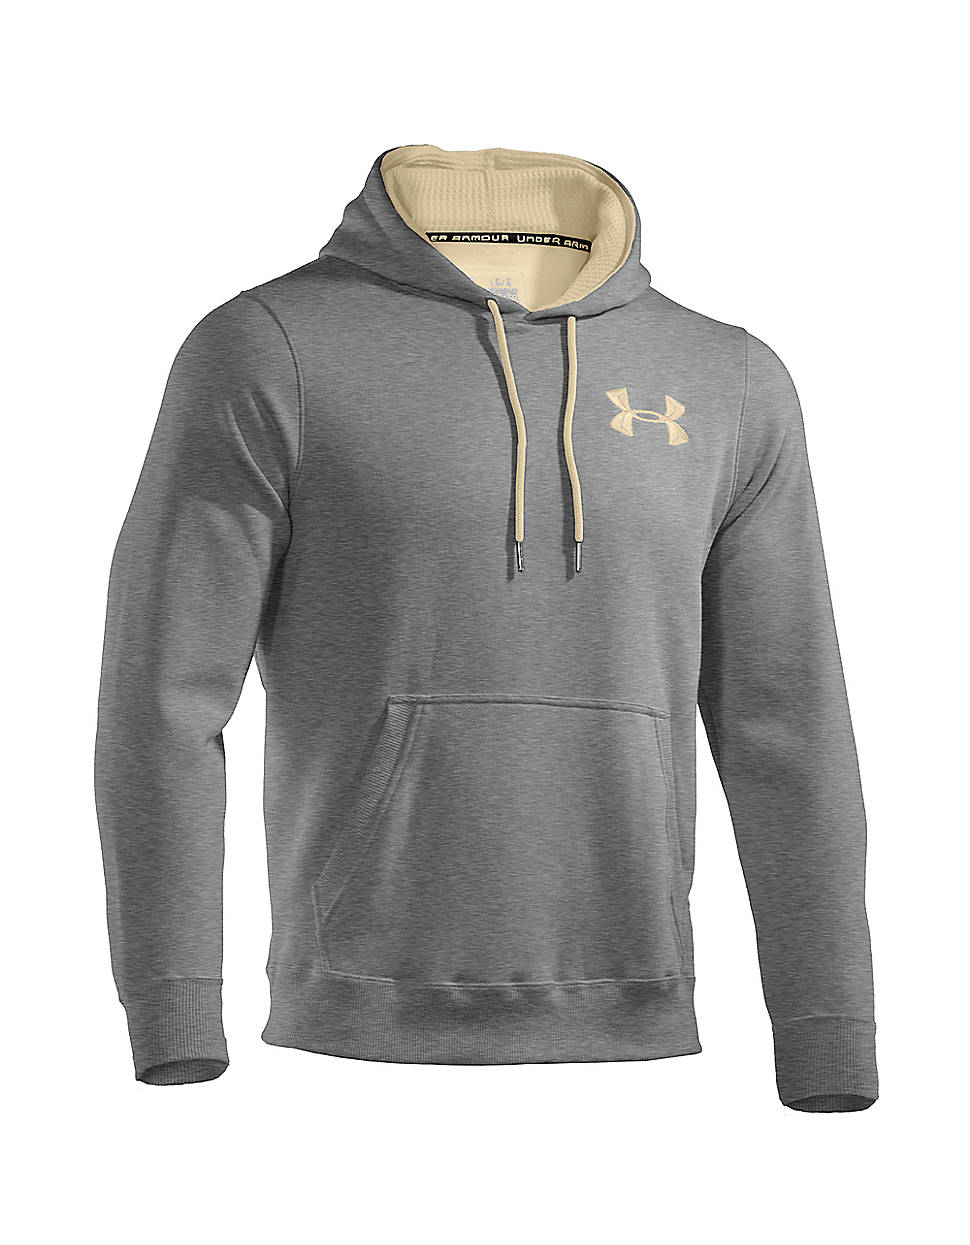 Under Armour Charged Cotton Storm Fleece Hoody in Gray for Men - Lyst